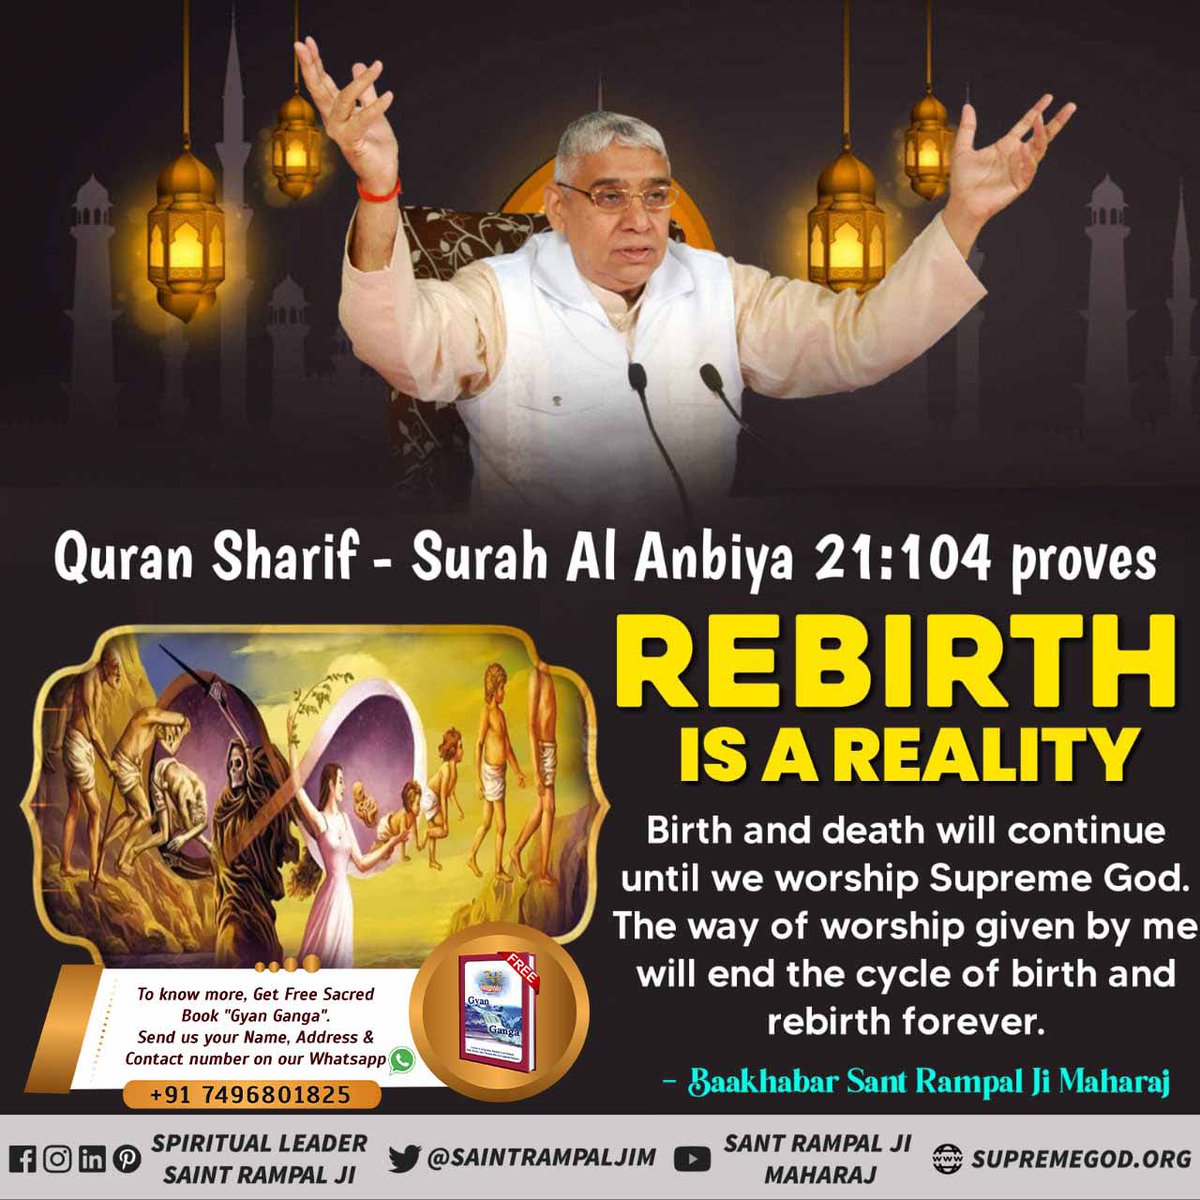 #GodMorningTuesday Islam belief in Birth/Rebirth/Re-creation/Day of Judgement. #QuranSharif, Surat Mullakki 67, Aayat no 1&2- ‘one who made death and life, means there is rebirth. Download the sacred book 'Musalman nahi samjhe gyan Quran' #tuesdaymotivations